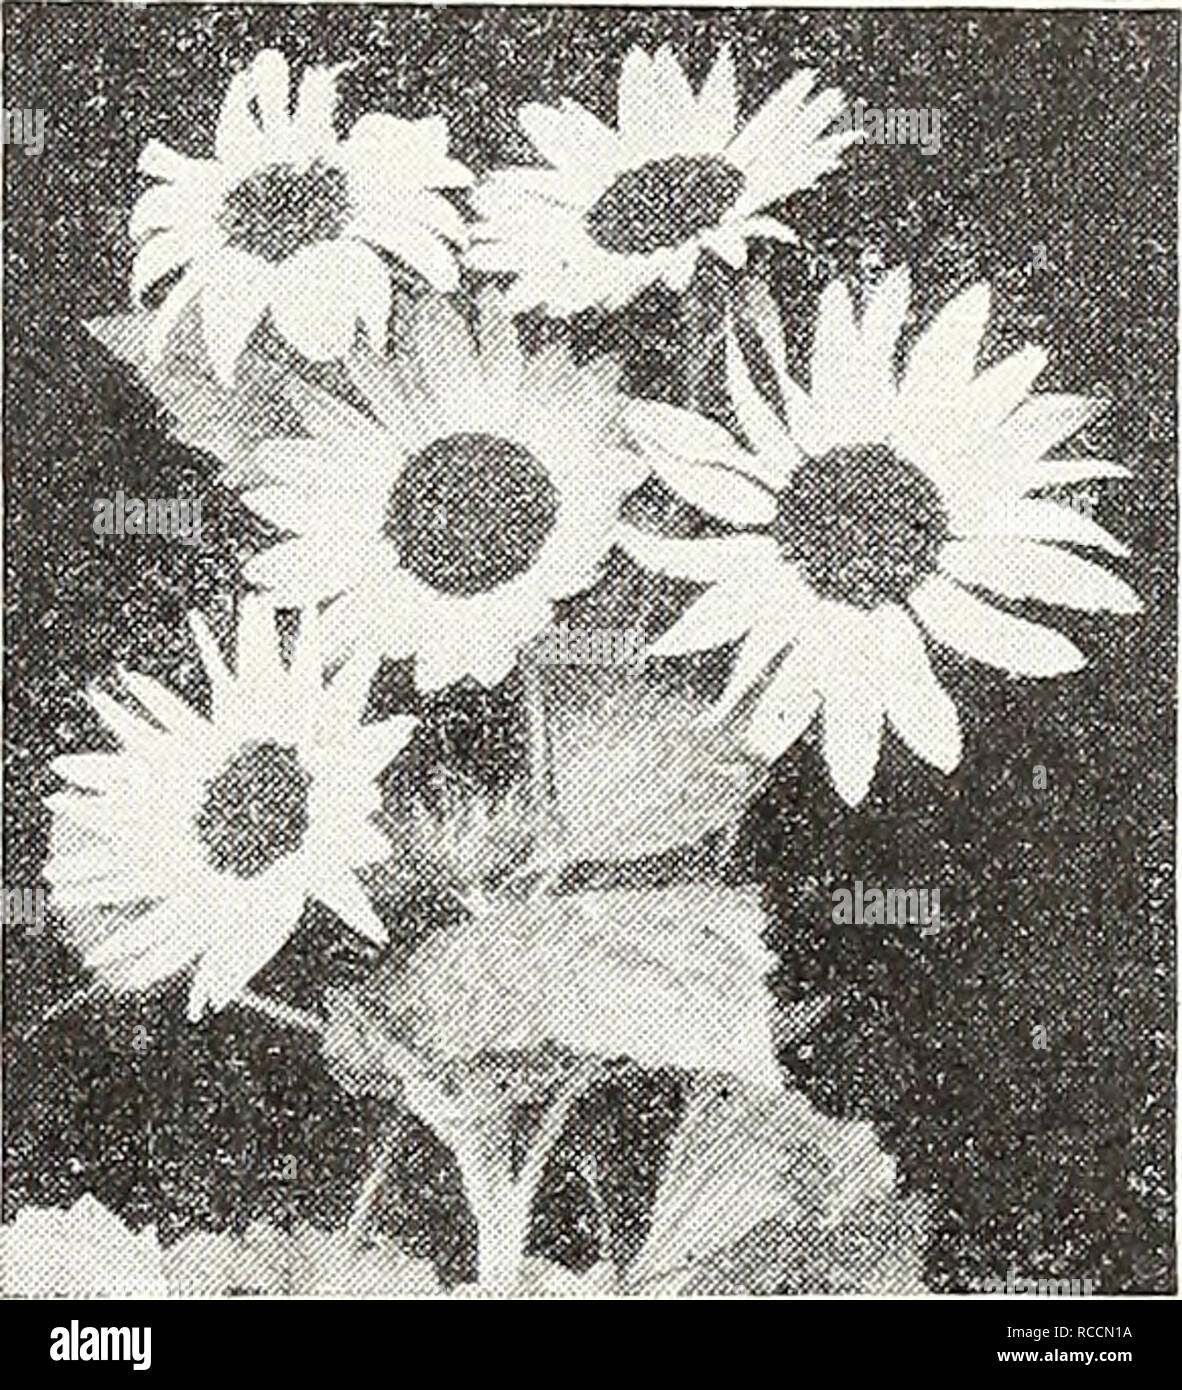 . Dreer's 1948 - our 110th year. Seeds Catalogs; Nursery stock Catalogs; Gardening Equipment and supplies Catalogs; Flowers Seeds Catalogs; Vegetables Seeds Catalogs; Fruit Seeds Catalogs. Dahlborg Daisy Dcihlborg Daisy ® A 2121 (ThymophylJa tenuiloba) A splendid dwarf plant, 6 in. high, forming cushions 8 in. across. The lemon-scented foliage is studded freely with tiny daisy-like blossoms of a brilliant rich golden-yellow color. Flowers from late spring until fall. Excellent for beds and edging. Pkt. 2Sc; large pkt. 7Sc.. Helianthus, Gerbera-Toned HelianfhuS -Sunflower ® 2575 Gerbera-Toned M Stock Photo